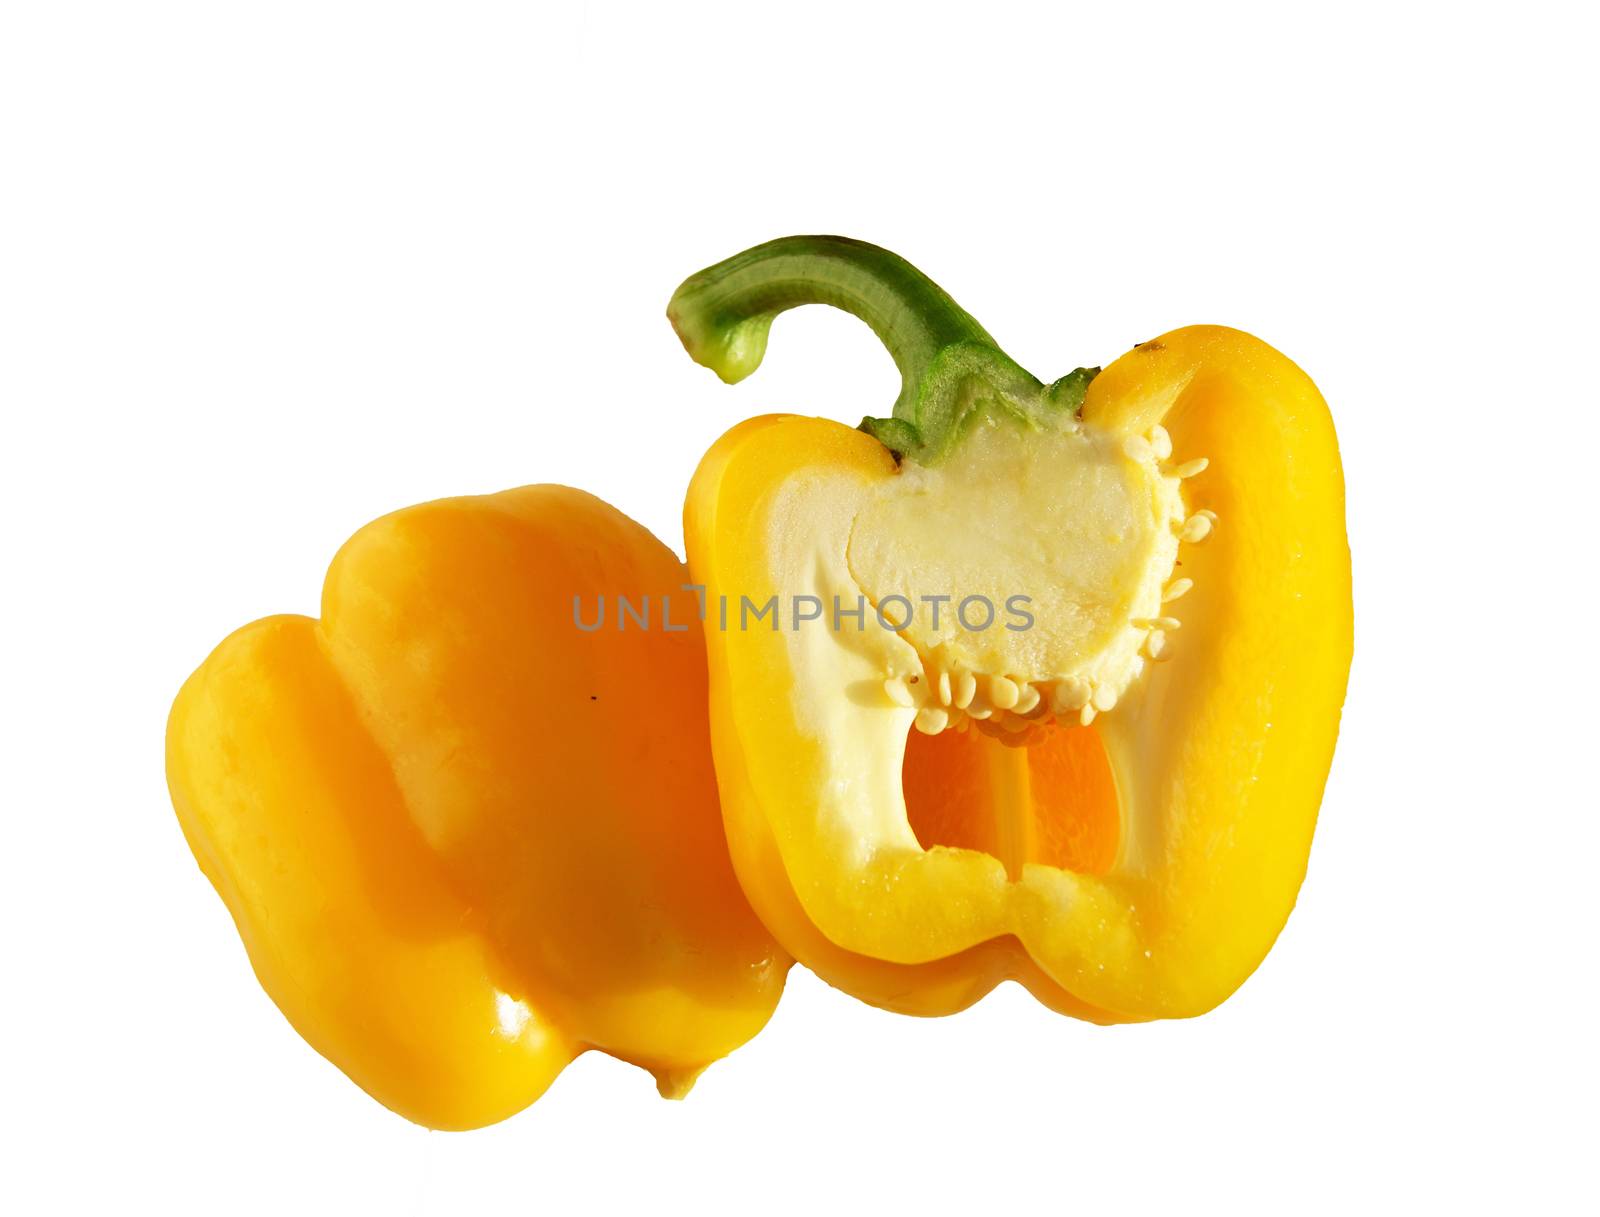 Bulgarian yellow pepper on white background is insulated